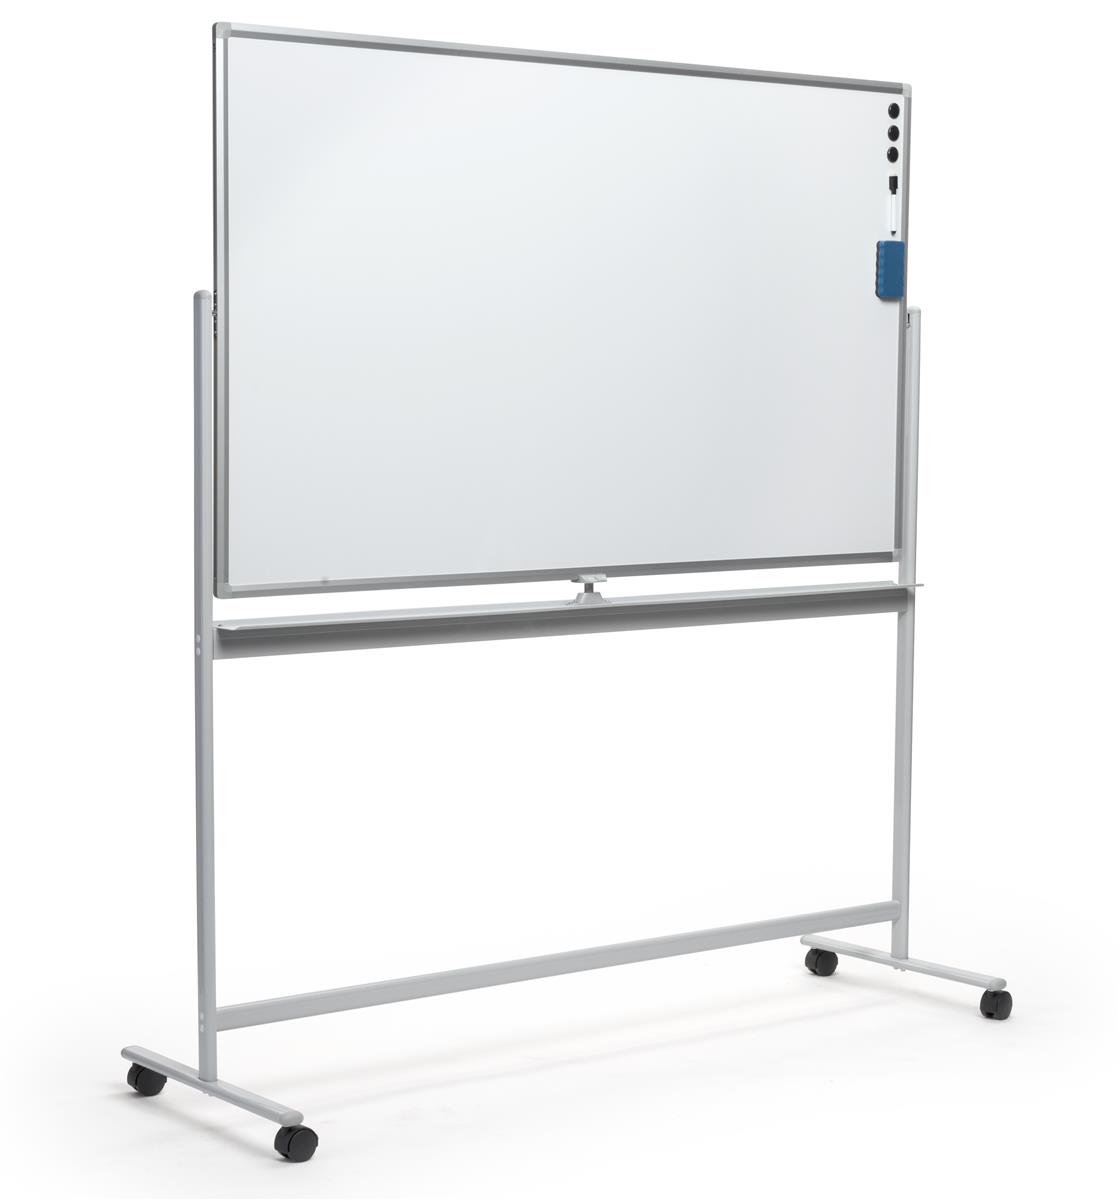 Mobile Whiteboard Magnetic Dry Erase Board 60 90cm Double Sided With Wheels US 